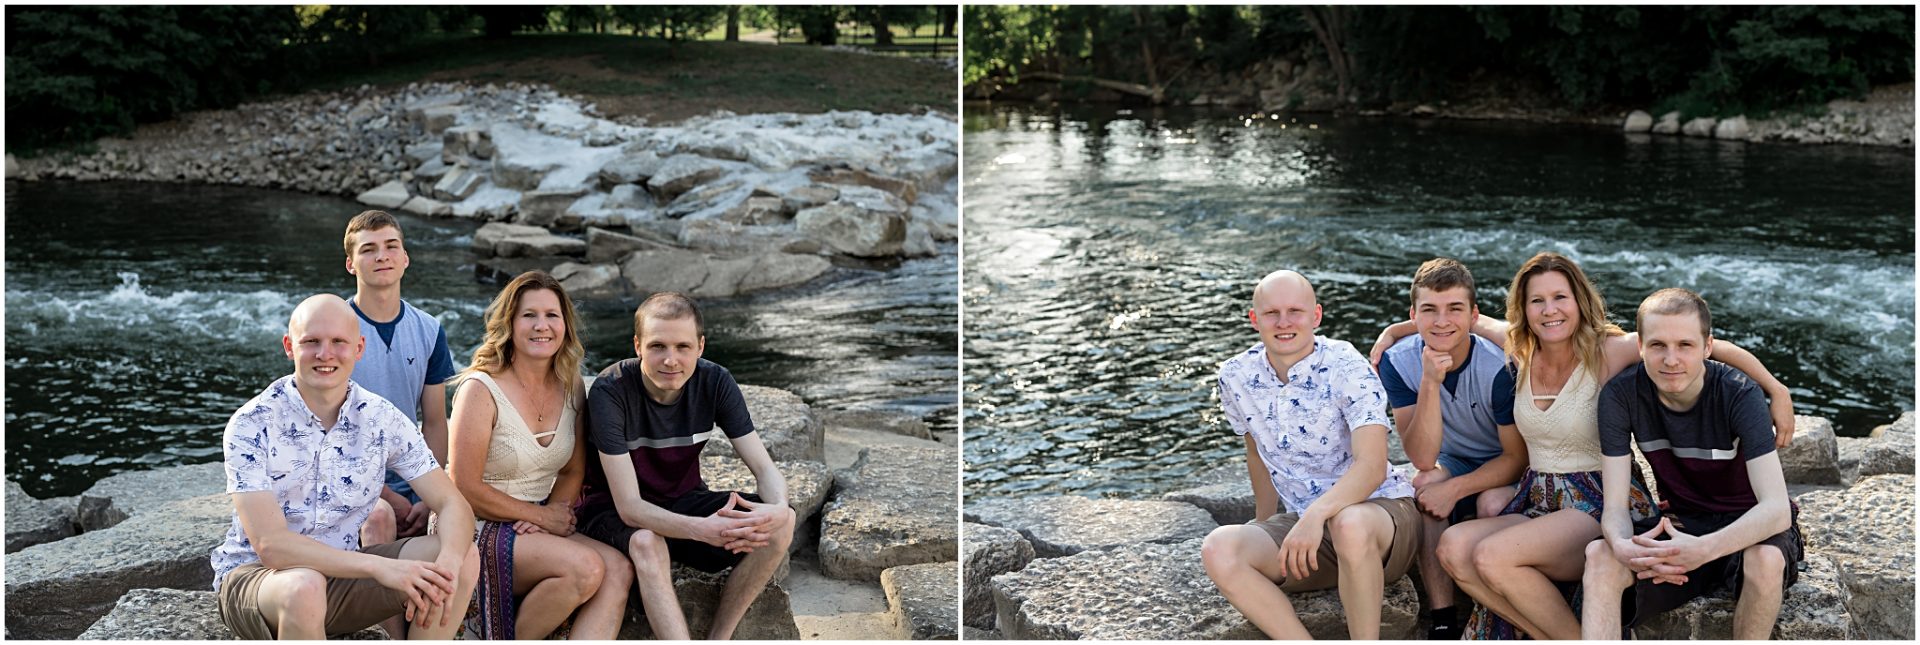 Family session by a creek